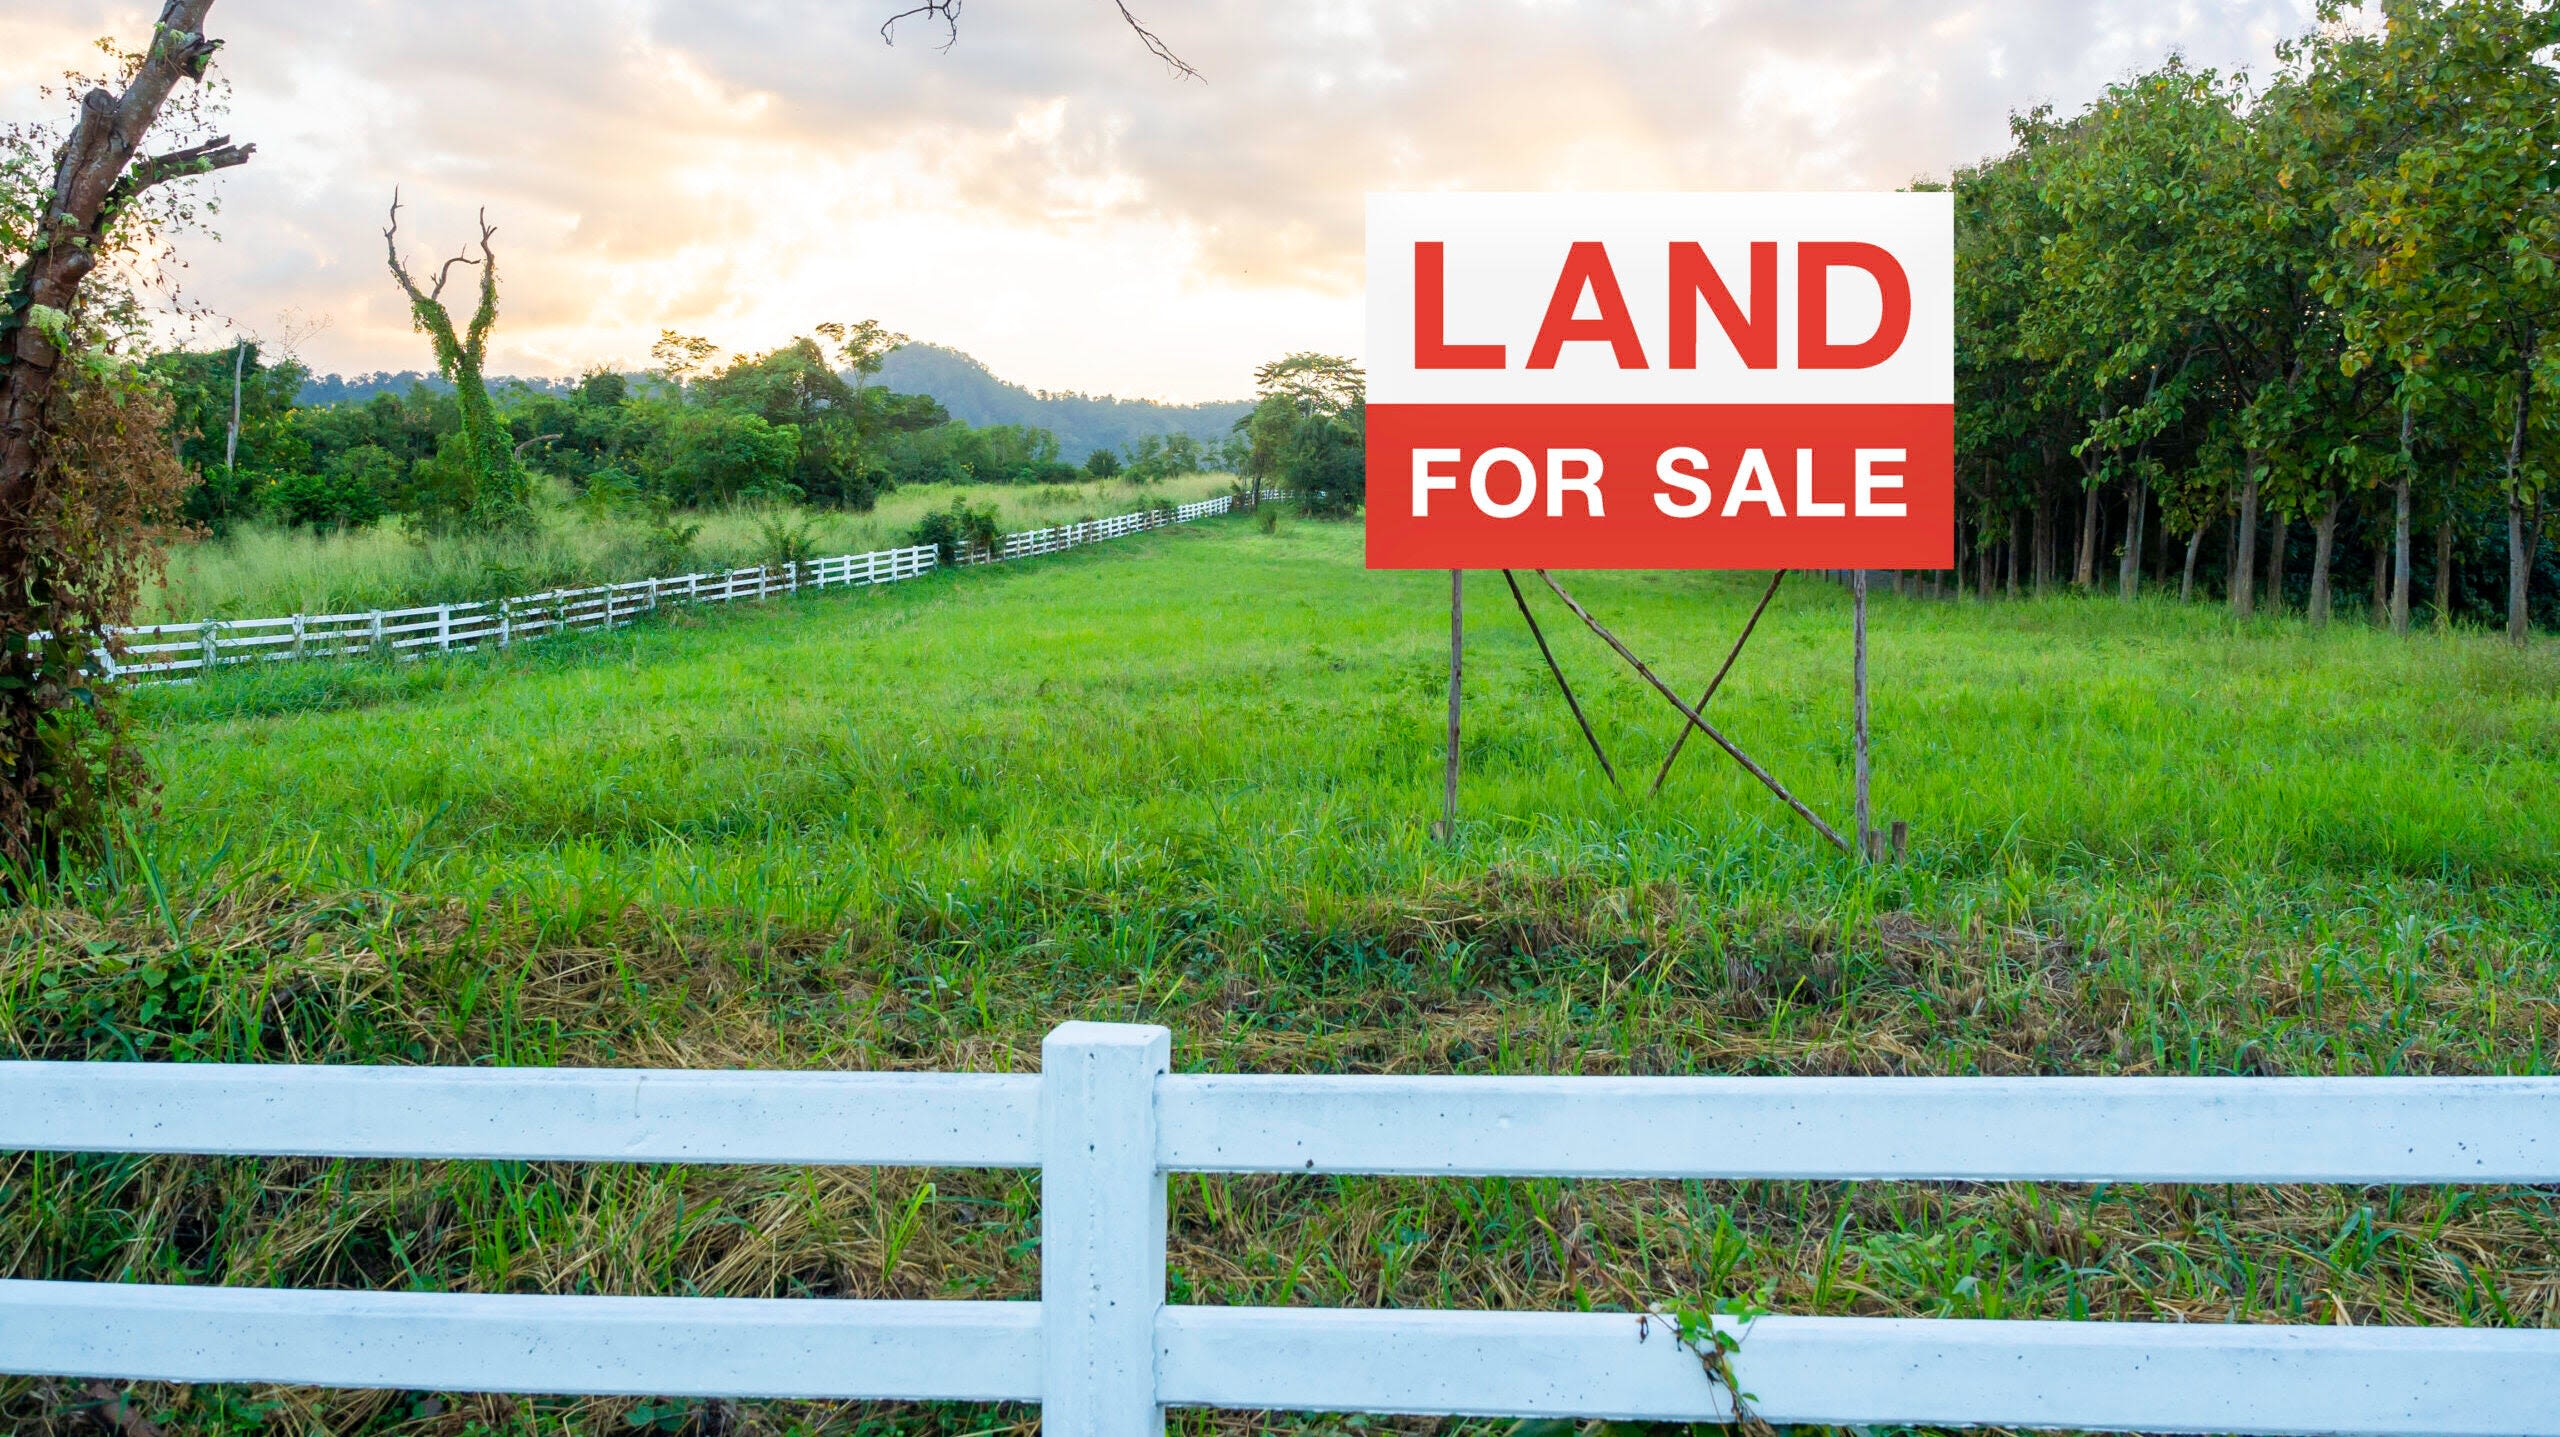 Land loans: How to buy raw, unimproved or improved land